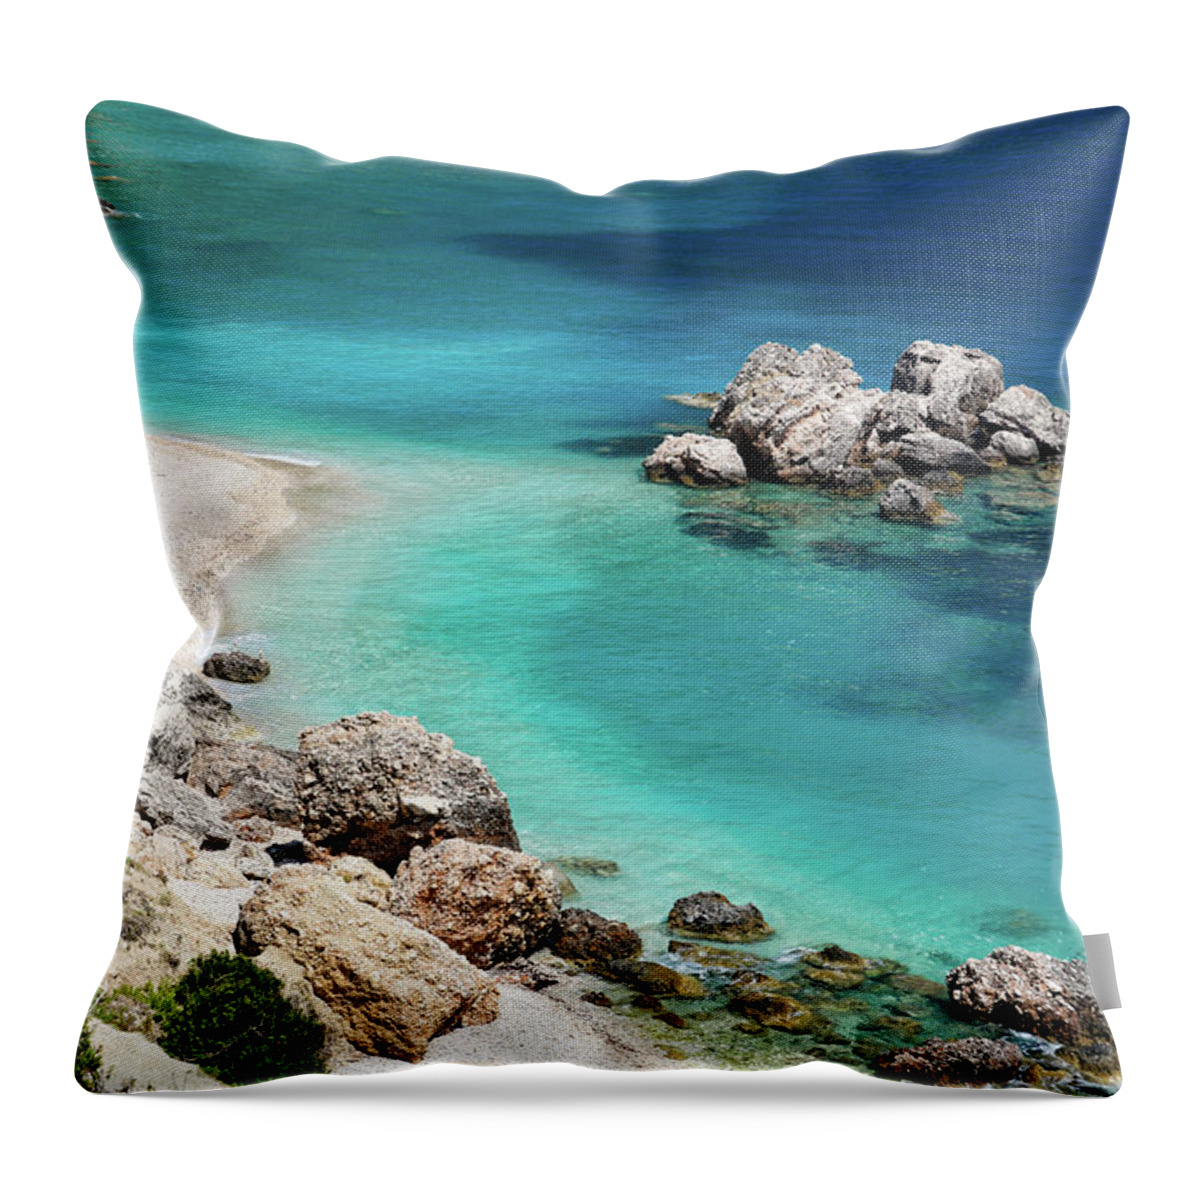 Vouti Throw Pillow featuring the photograph Vouti beach in Kefalonia, Greece #1 by Constantinos Iliopoulos